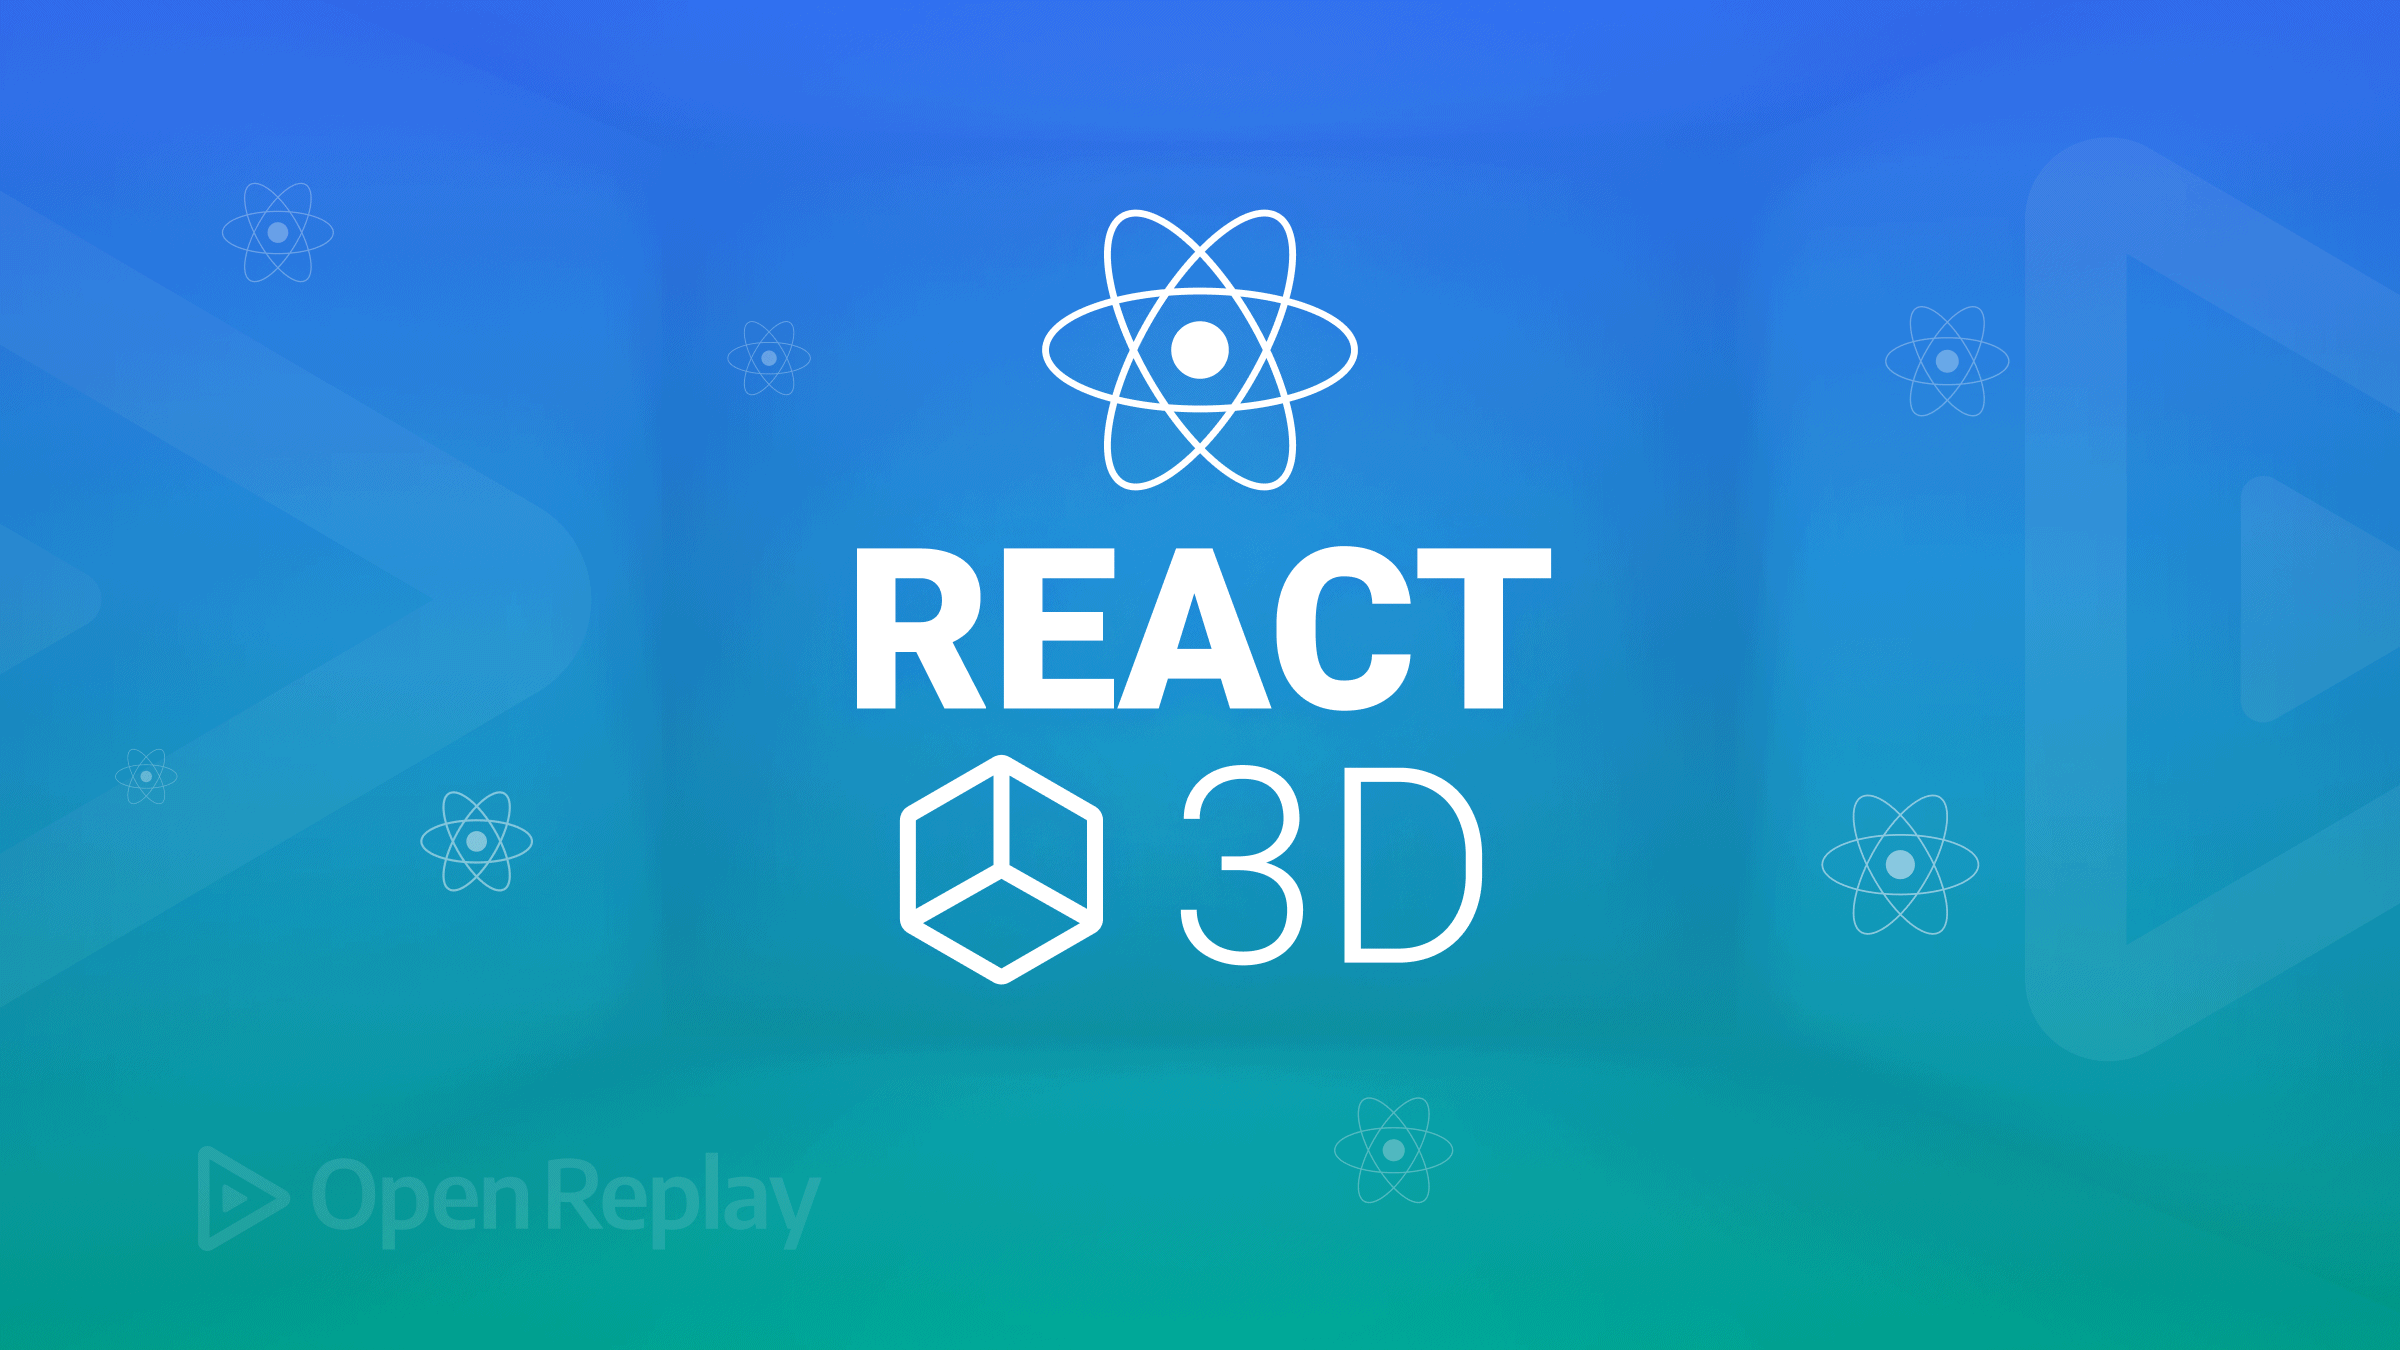 Implementing 3D graphics in React